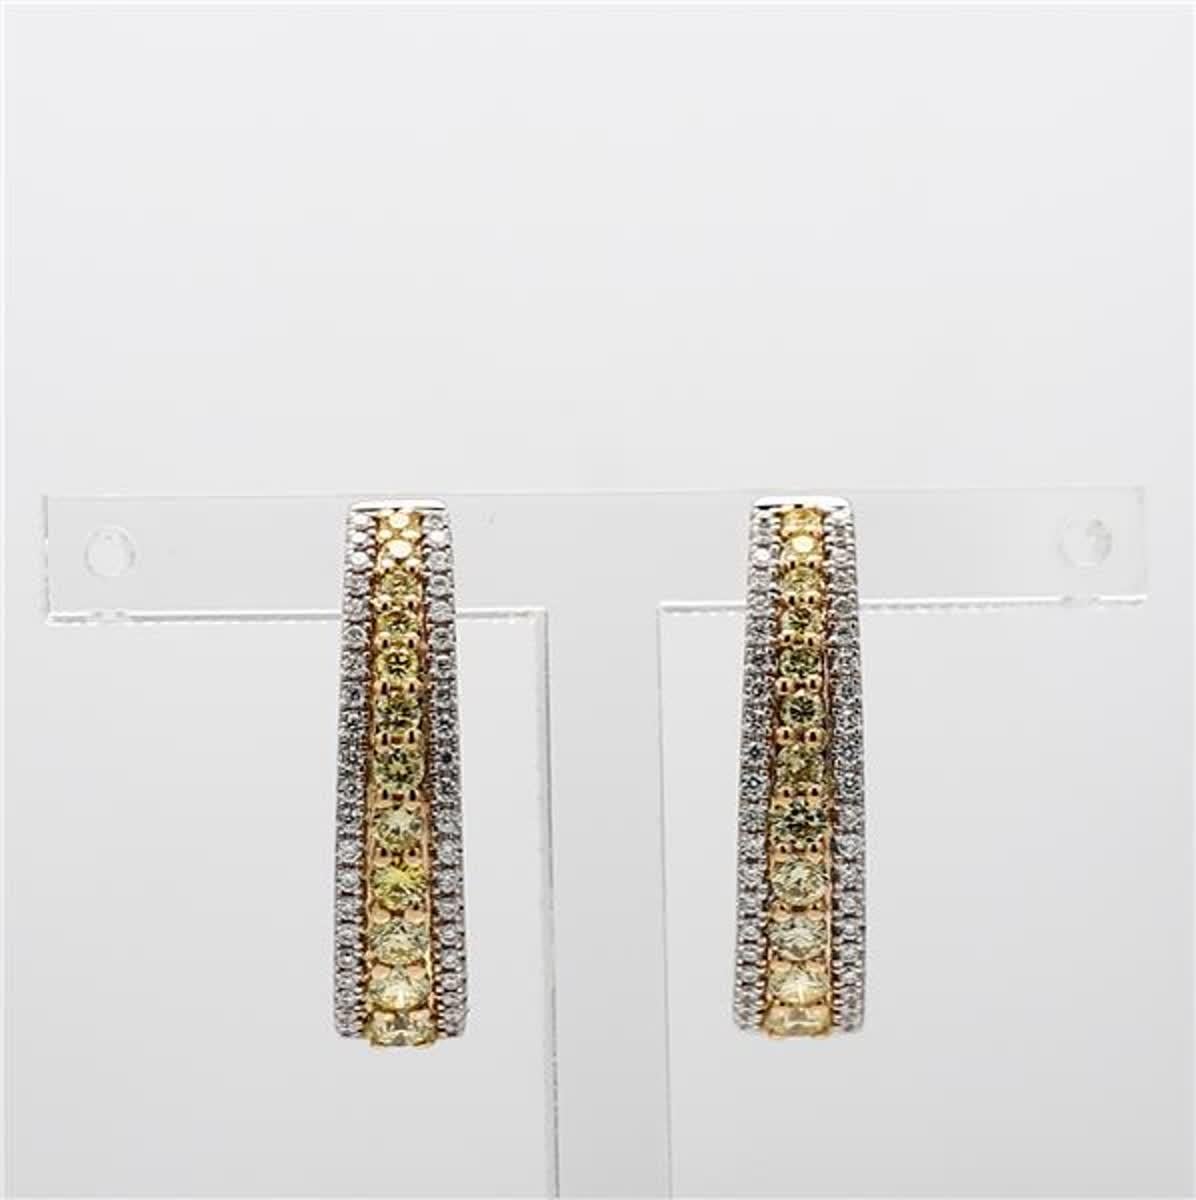 RareGemWorld's classic diamond earrings. Mounted in a beautiful 18K Yellow and White Gold setting with natural round cut yellow diamonds. These earrings include both natural round yellow diamond melee and natural round white diamond melee. These